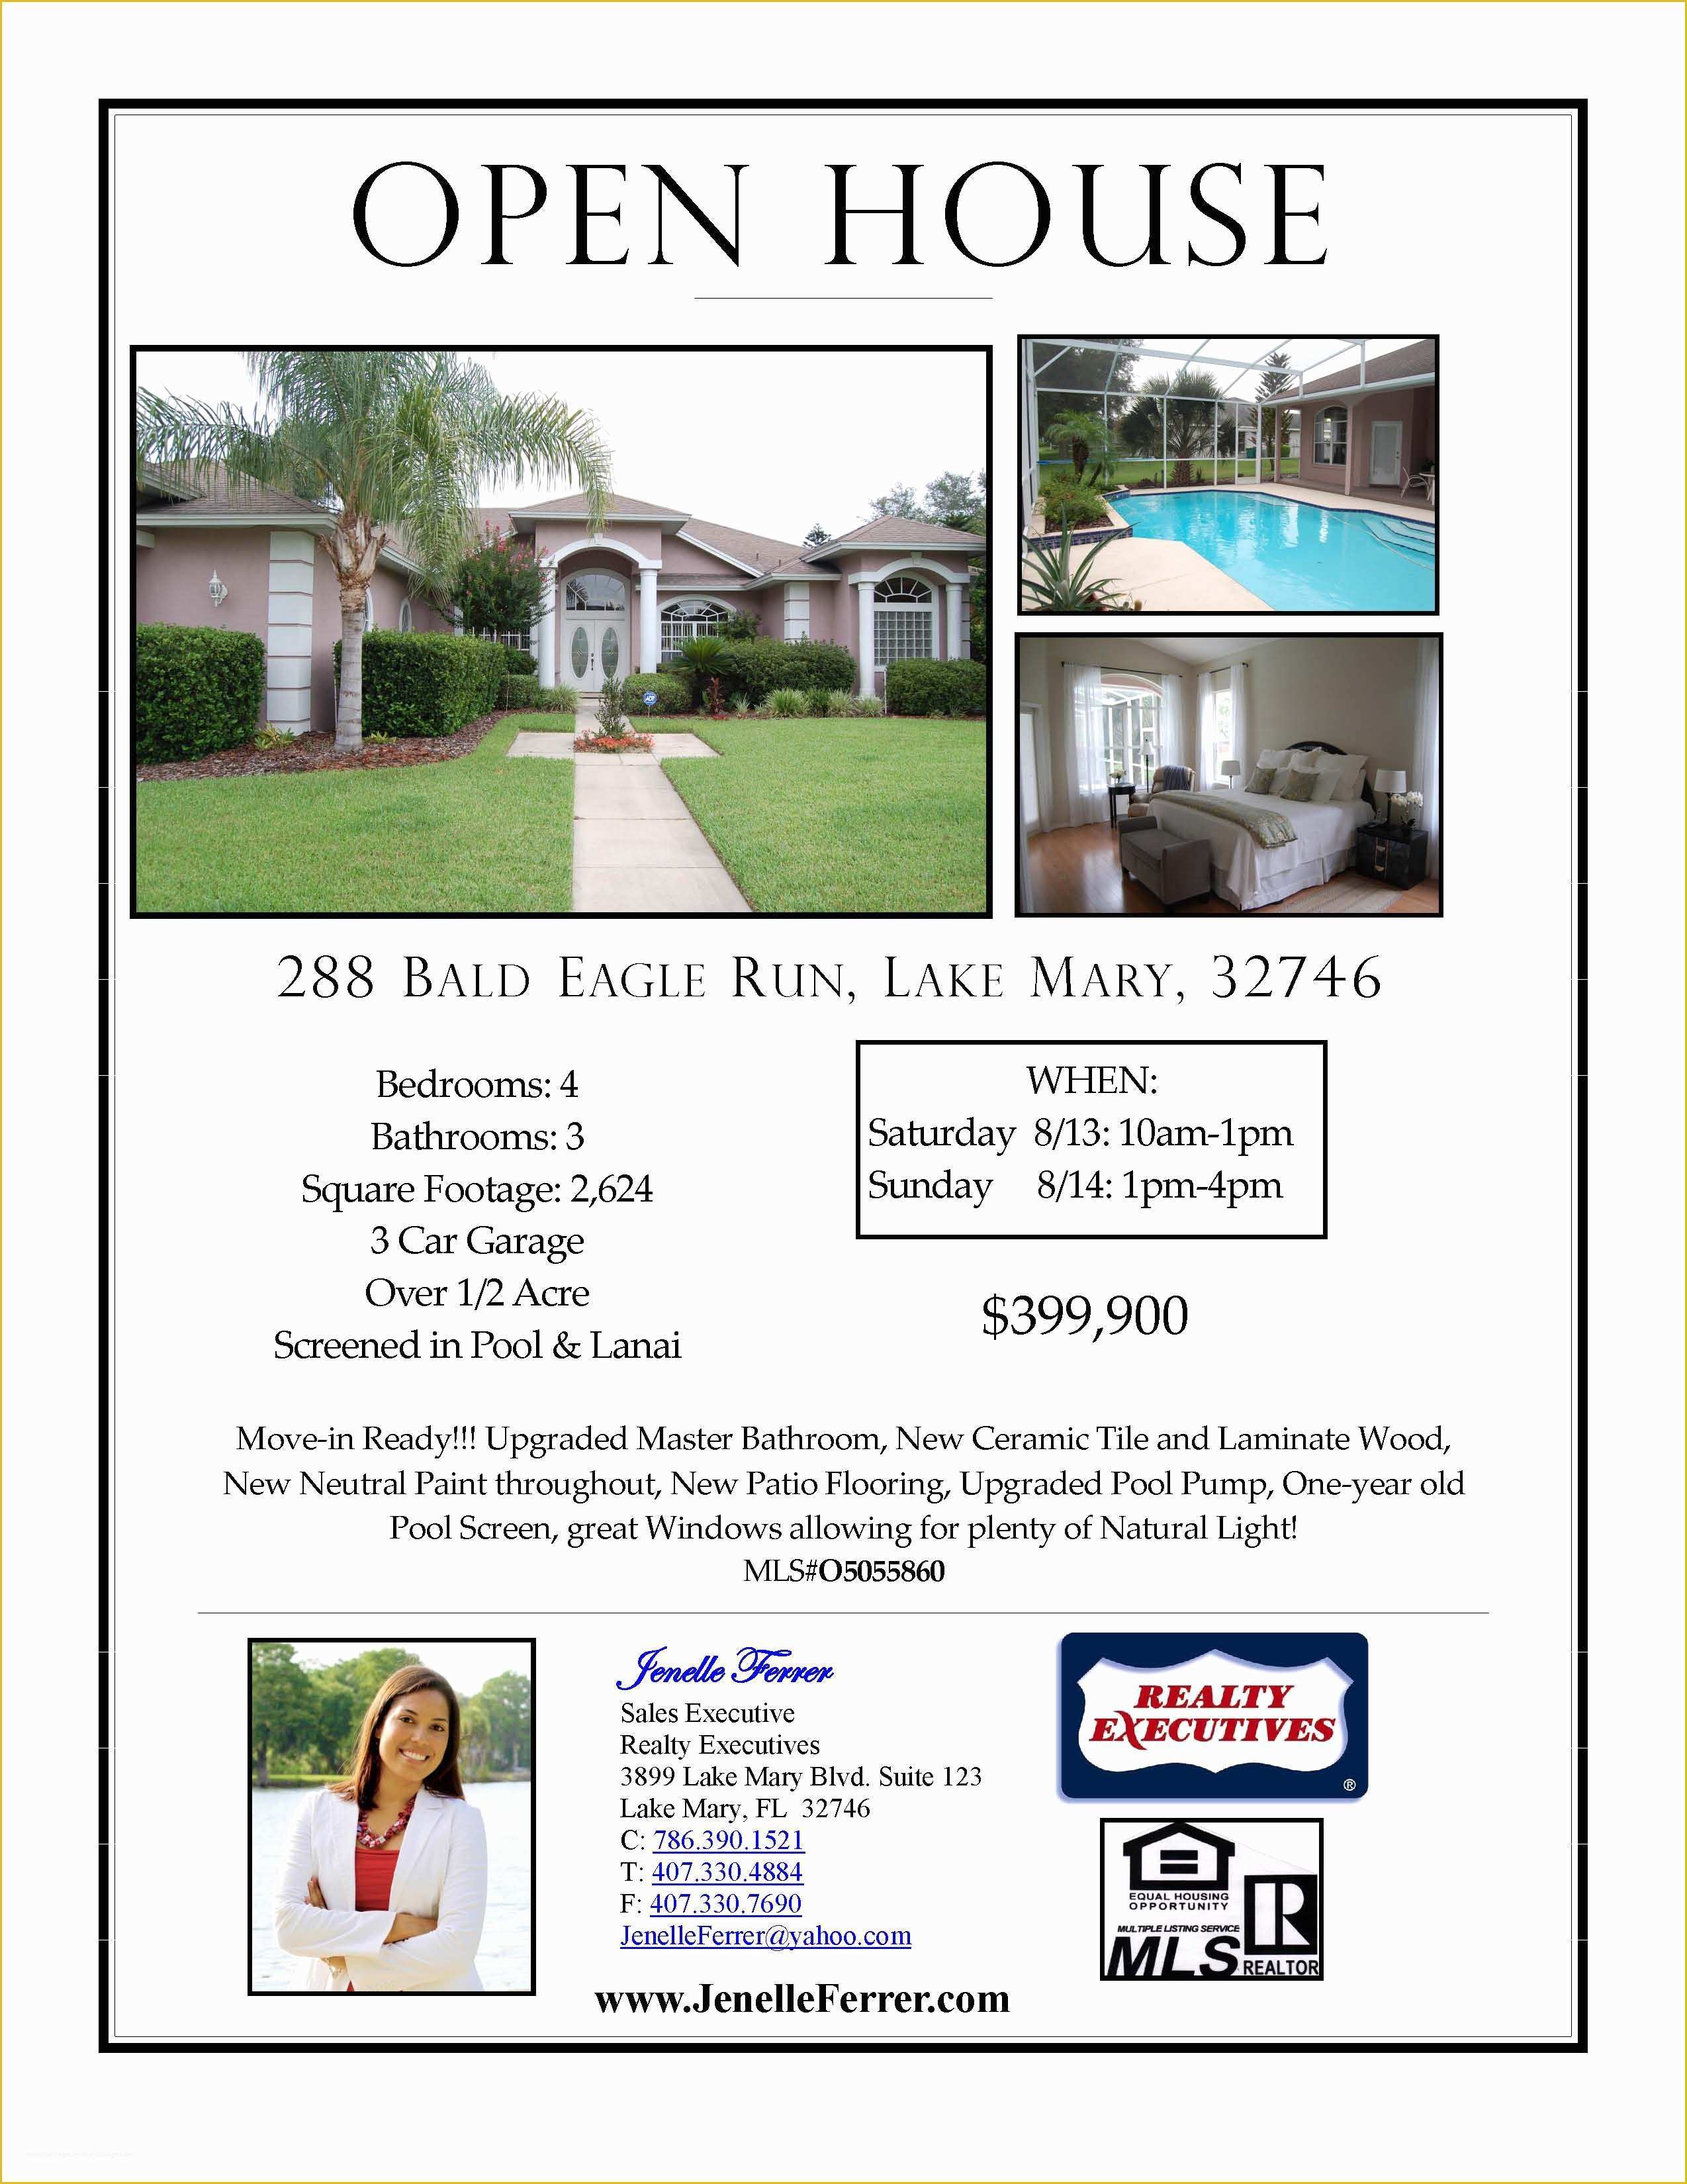 Open House Flyer Template Free Publisher Of Lake Mary Fl Home